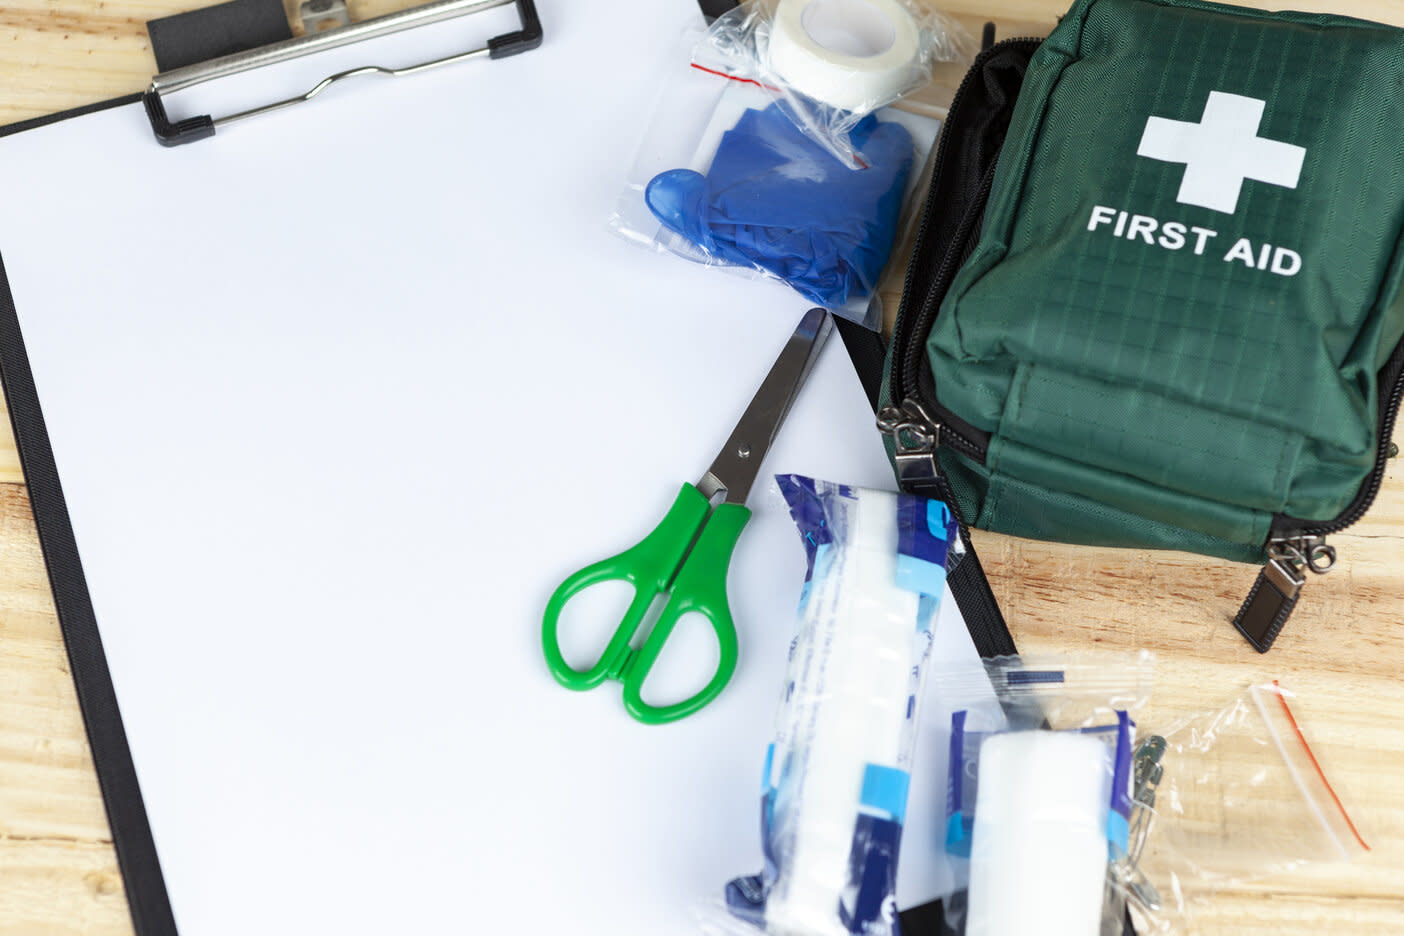 What are the standards for workplace first aid kits?